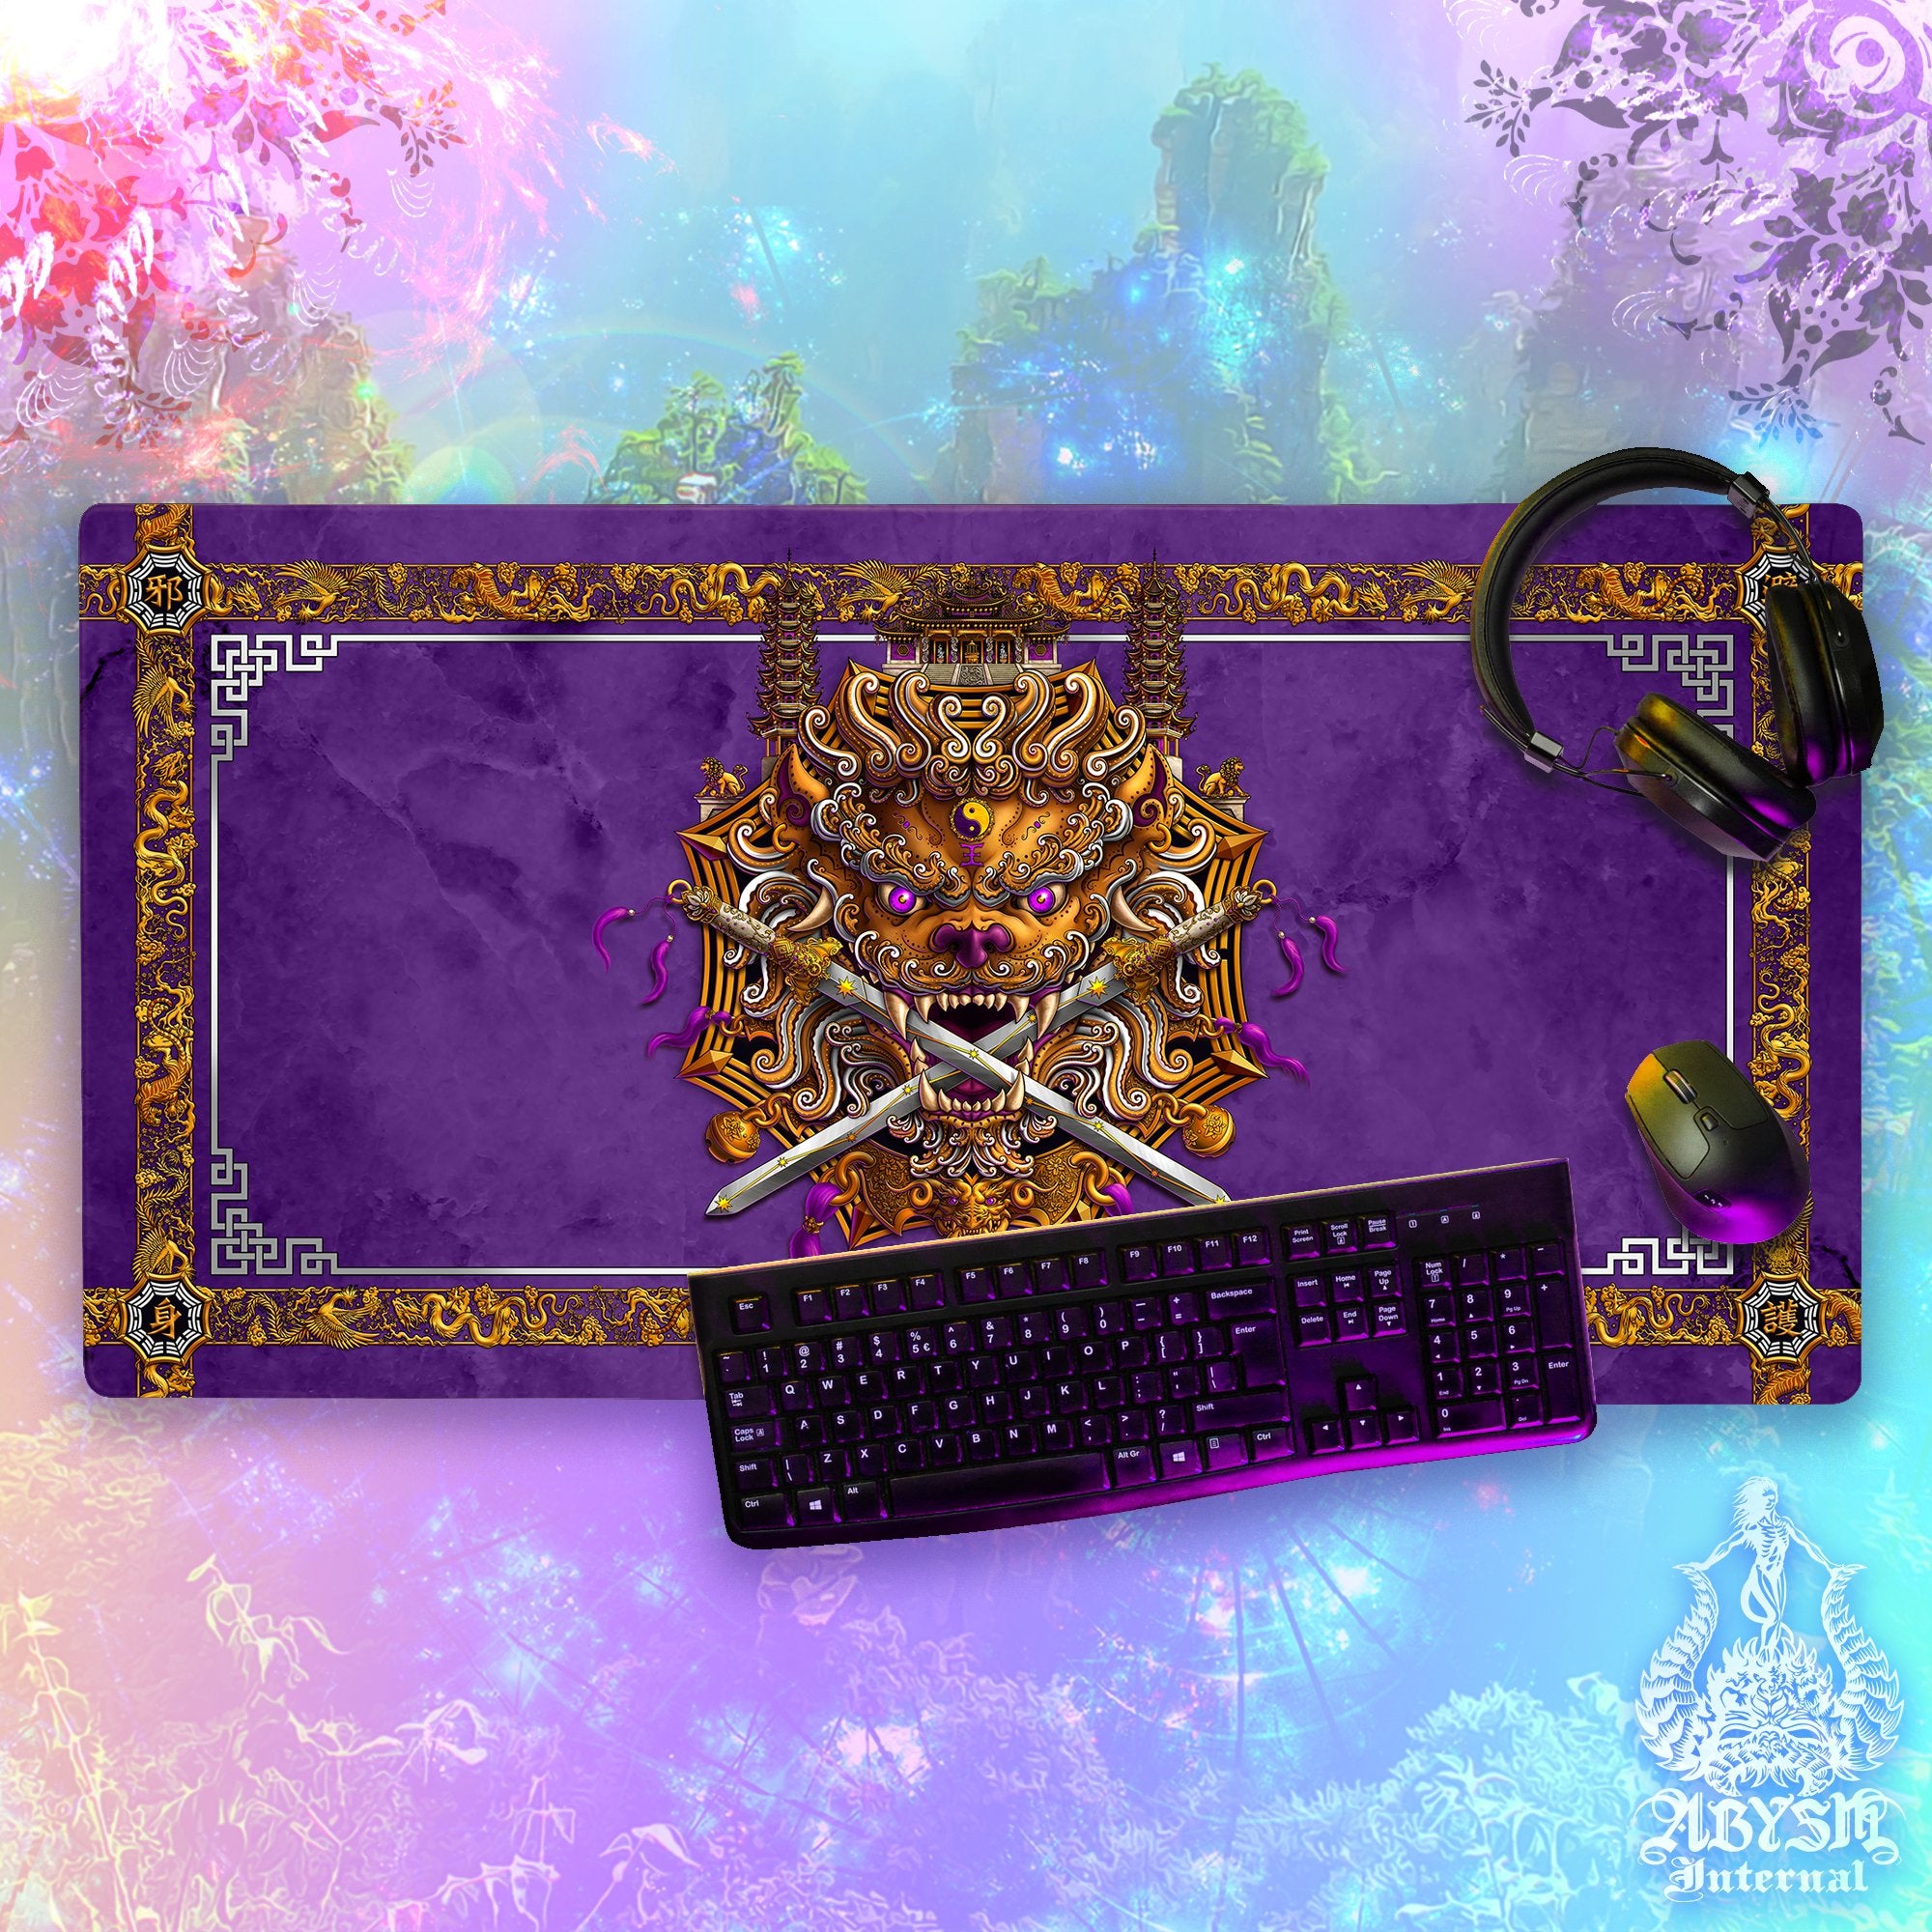 Chinese Lion Mouse Pad, Taiwan Gaming Desk Mat, Purple White Gold Workpad, Asian Table Protector Cover, Fantasy Art Print - Abysm Internal